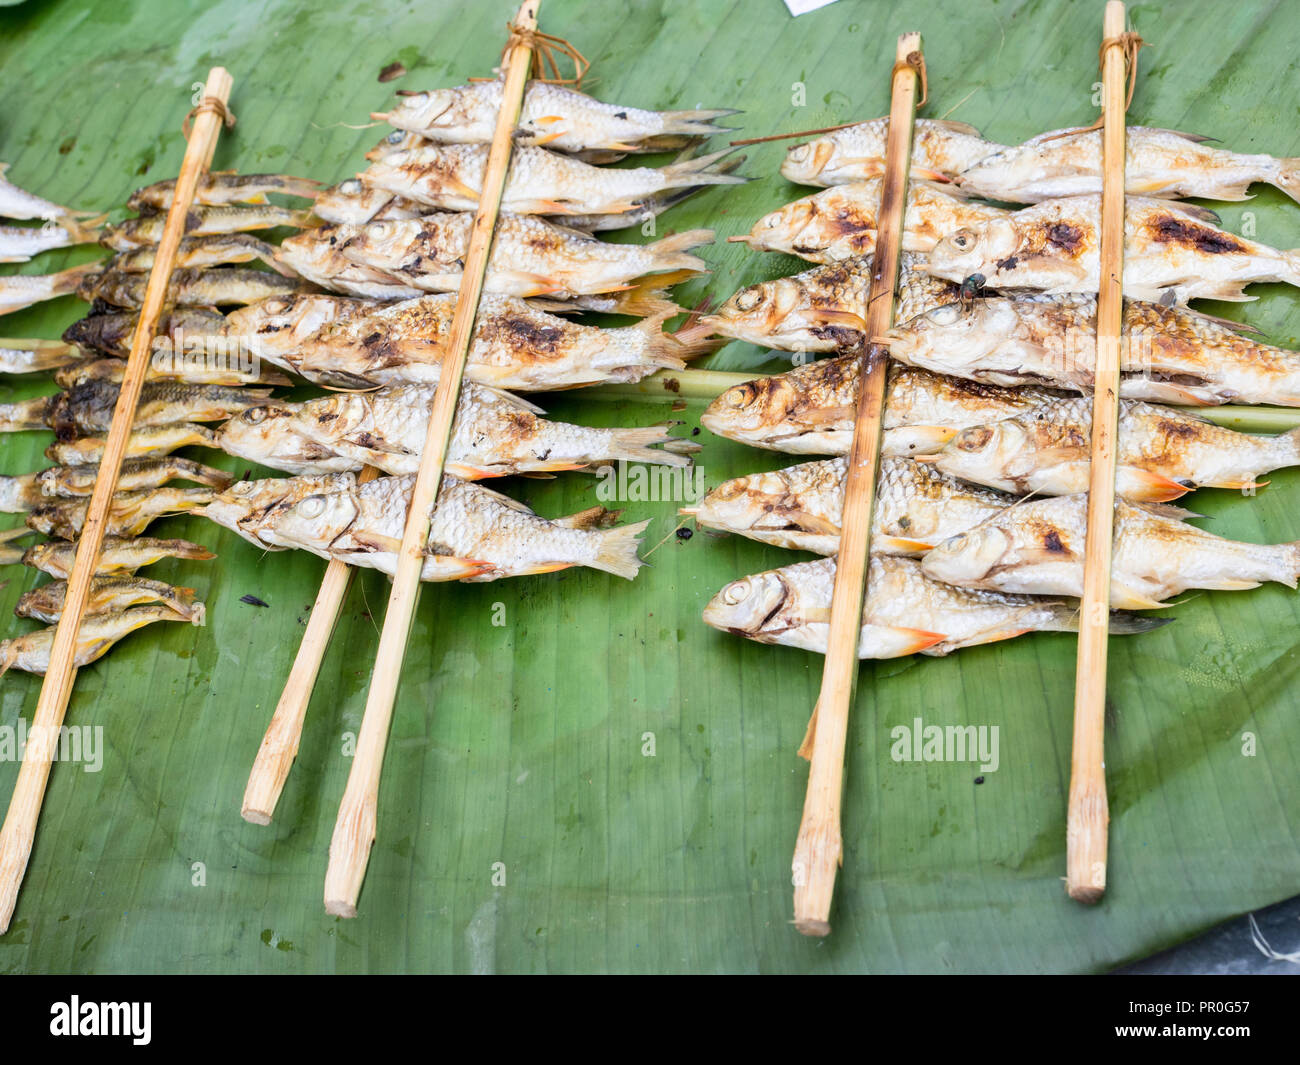 Grilled river fish from an outdoor market, Nong Khiaw, Laos, Indochina, Southeast Asia, Asia Stock Photo